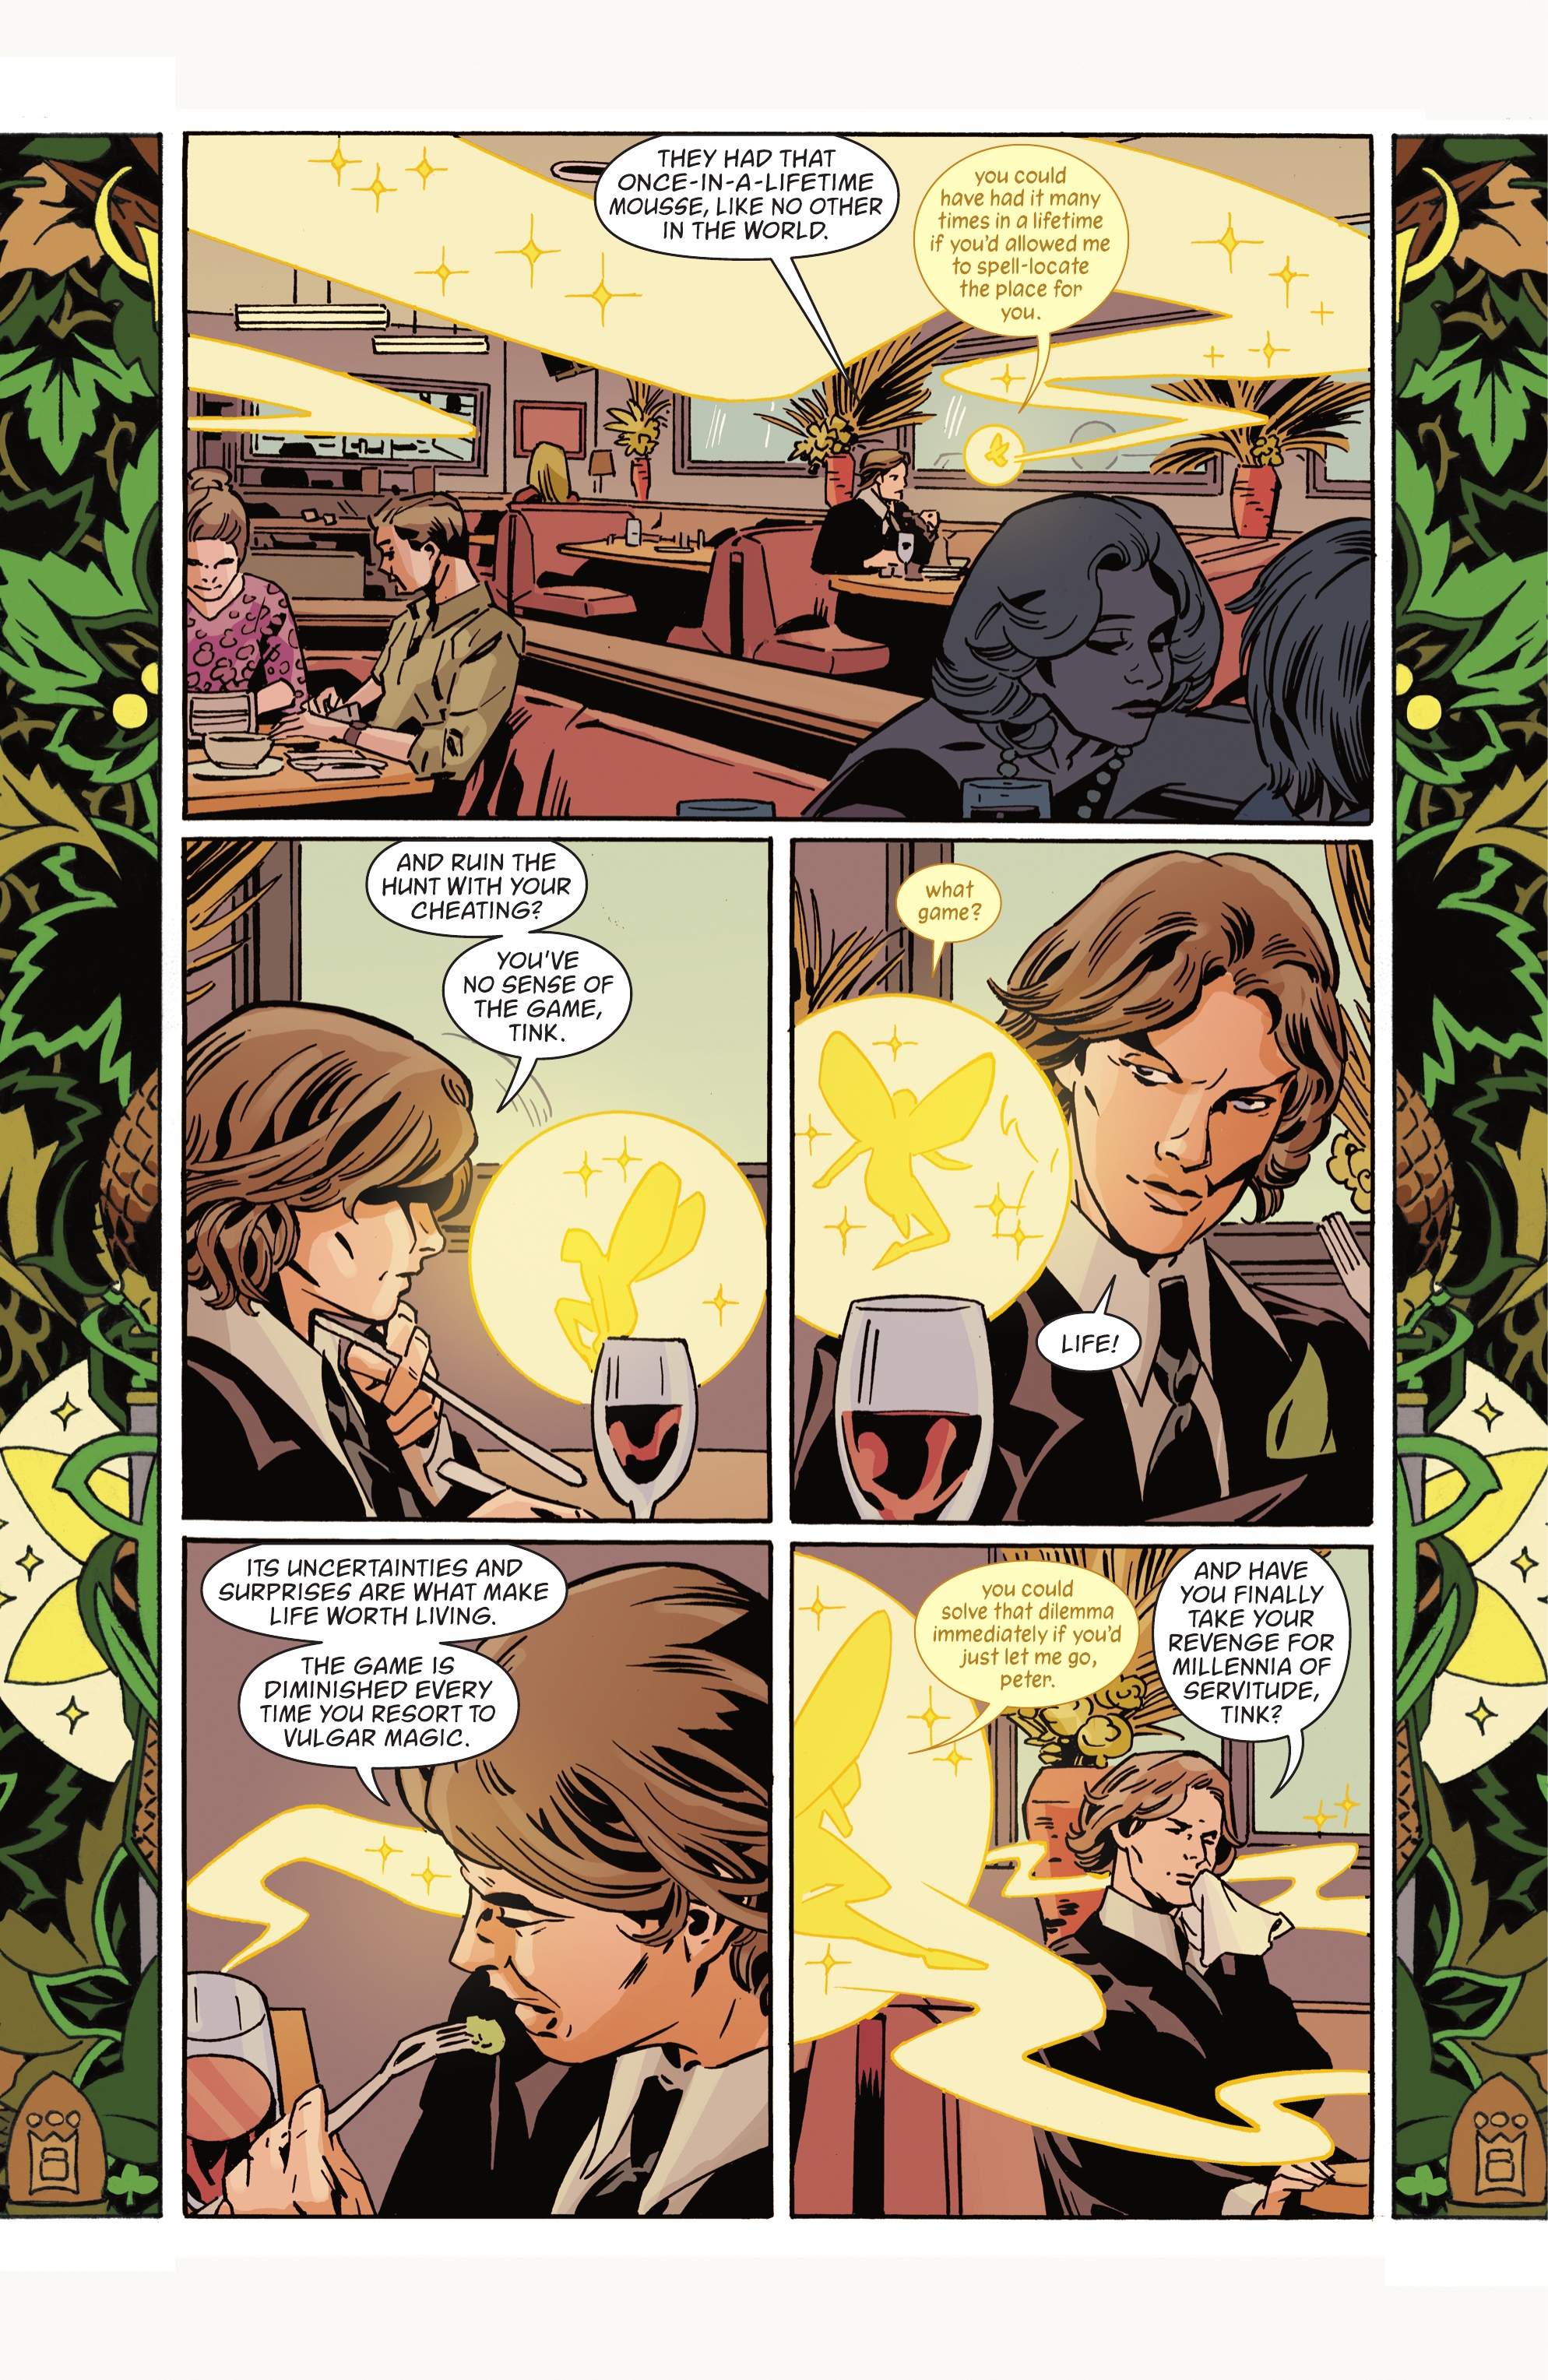 Fables (2002-): Chapter 156 - Page 4